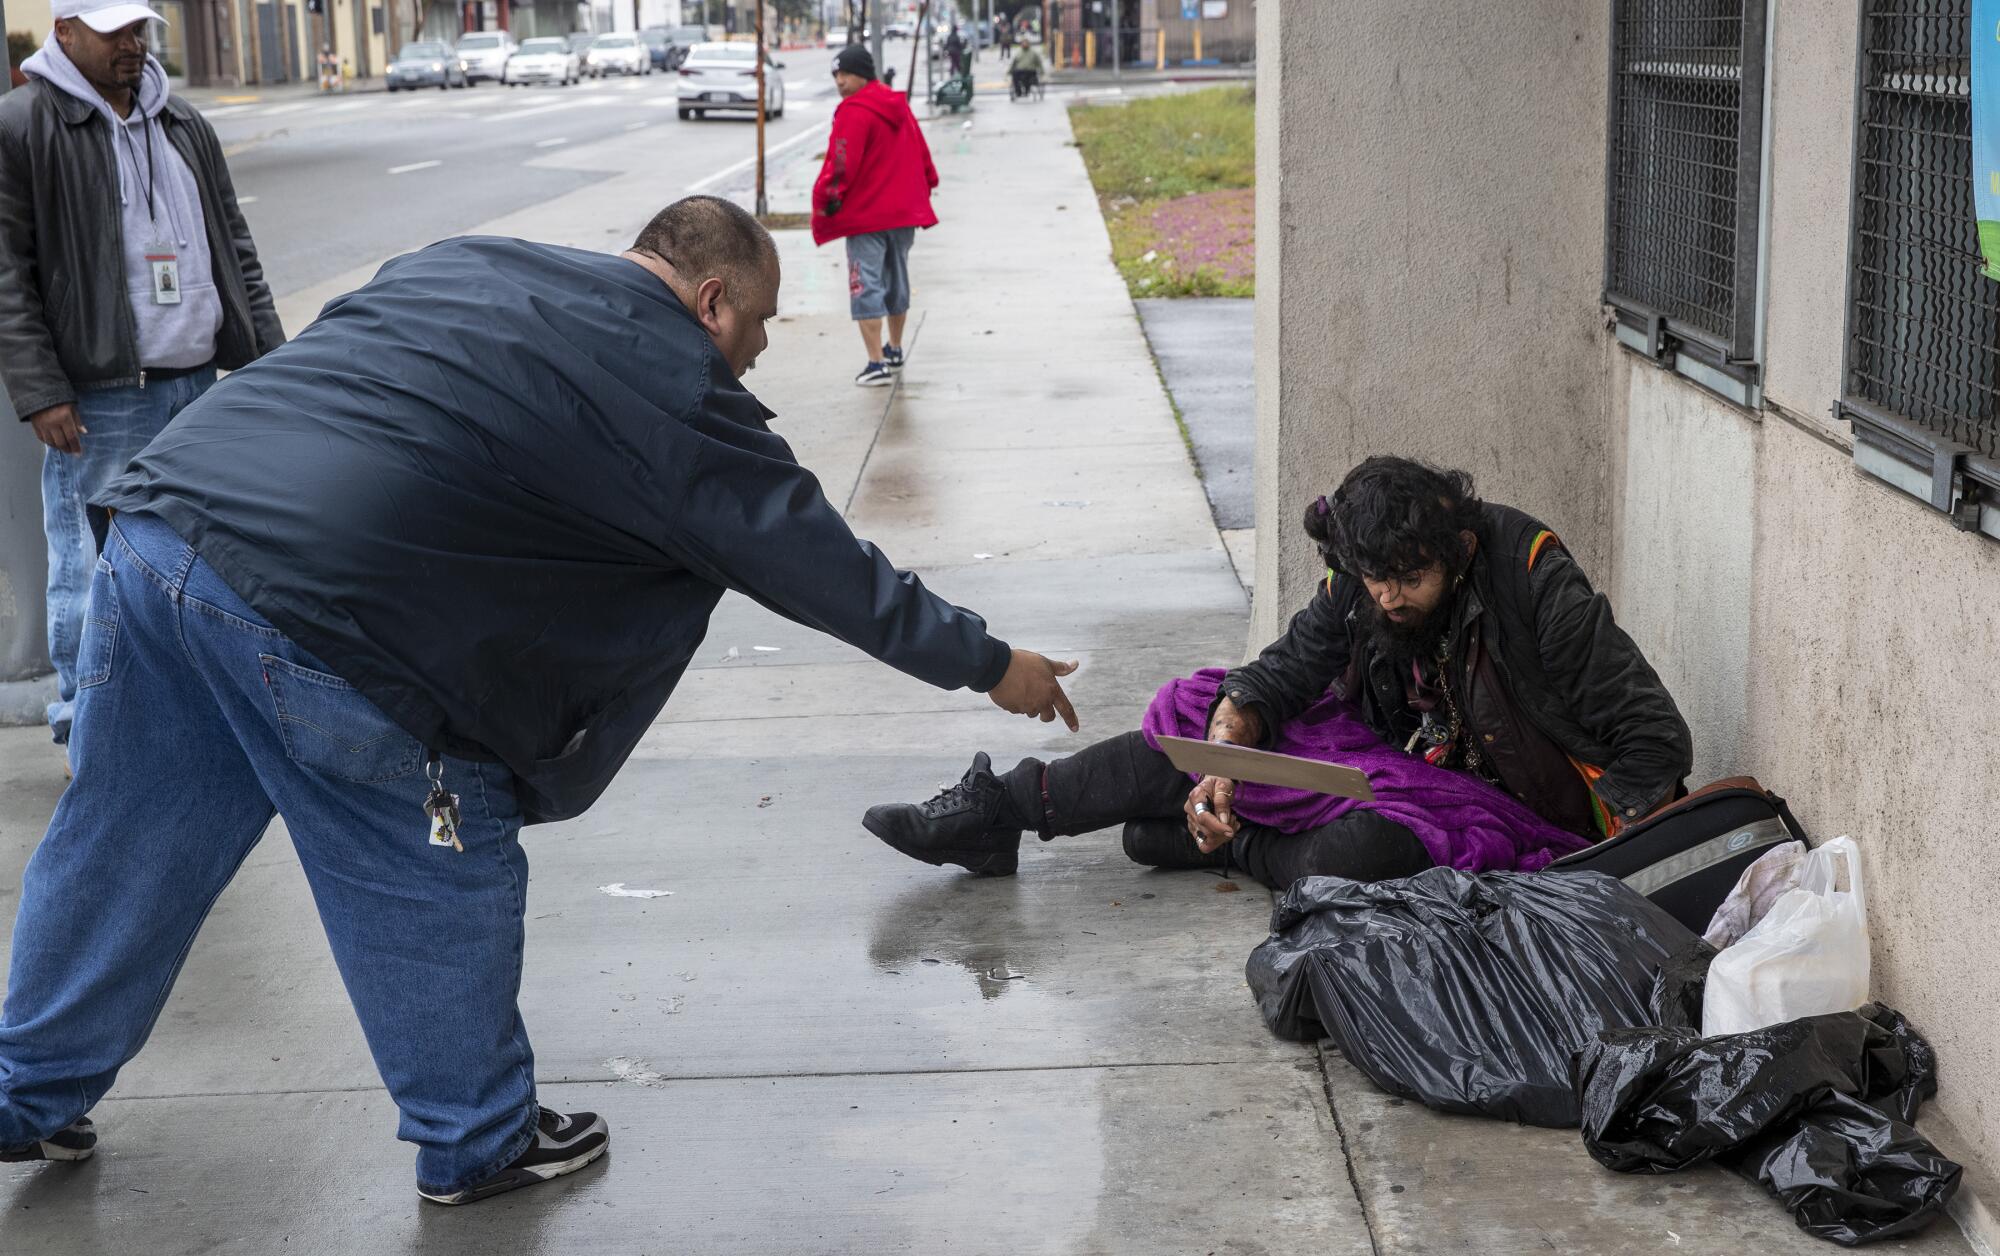 Ralph Gomez, who does outreach work with the homeless, tosses a clipboard for a signature to Davis Soto, taking care to stay at least 6 feet away in keeping with guidelines to help reduce the spread of the coronavirus.